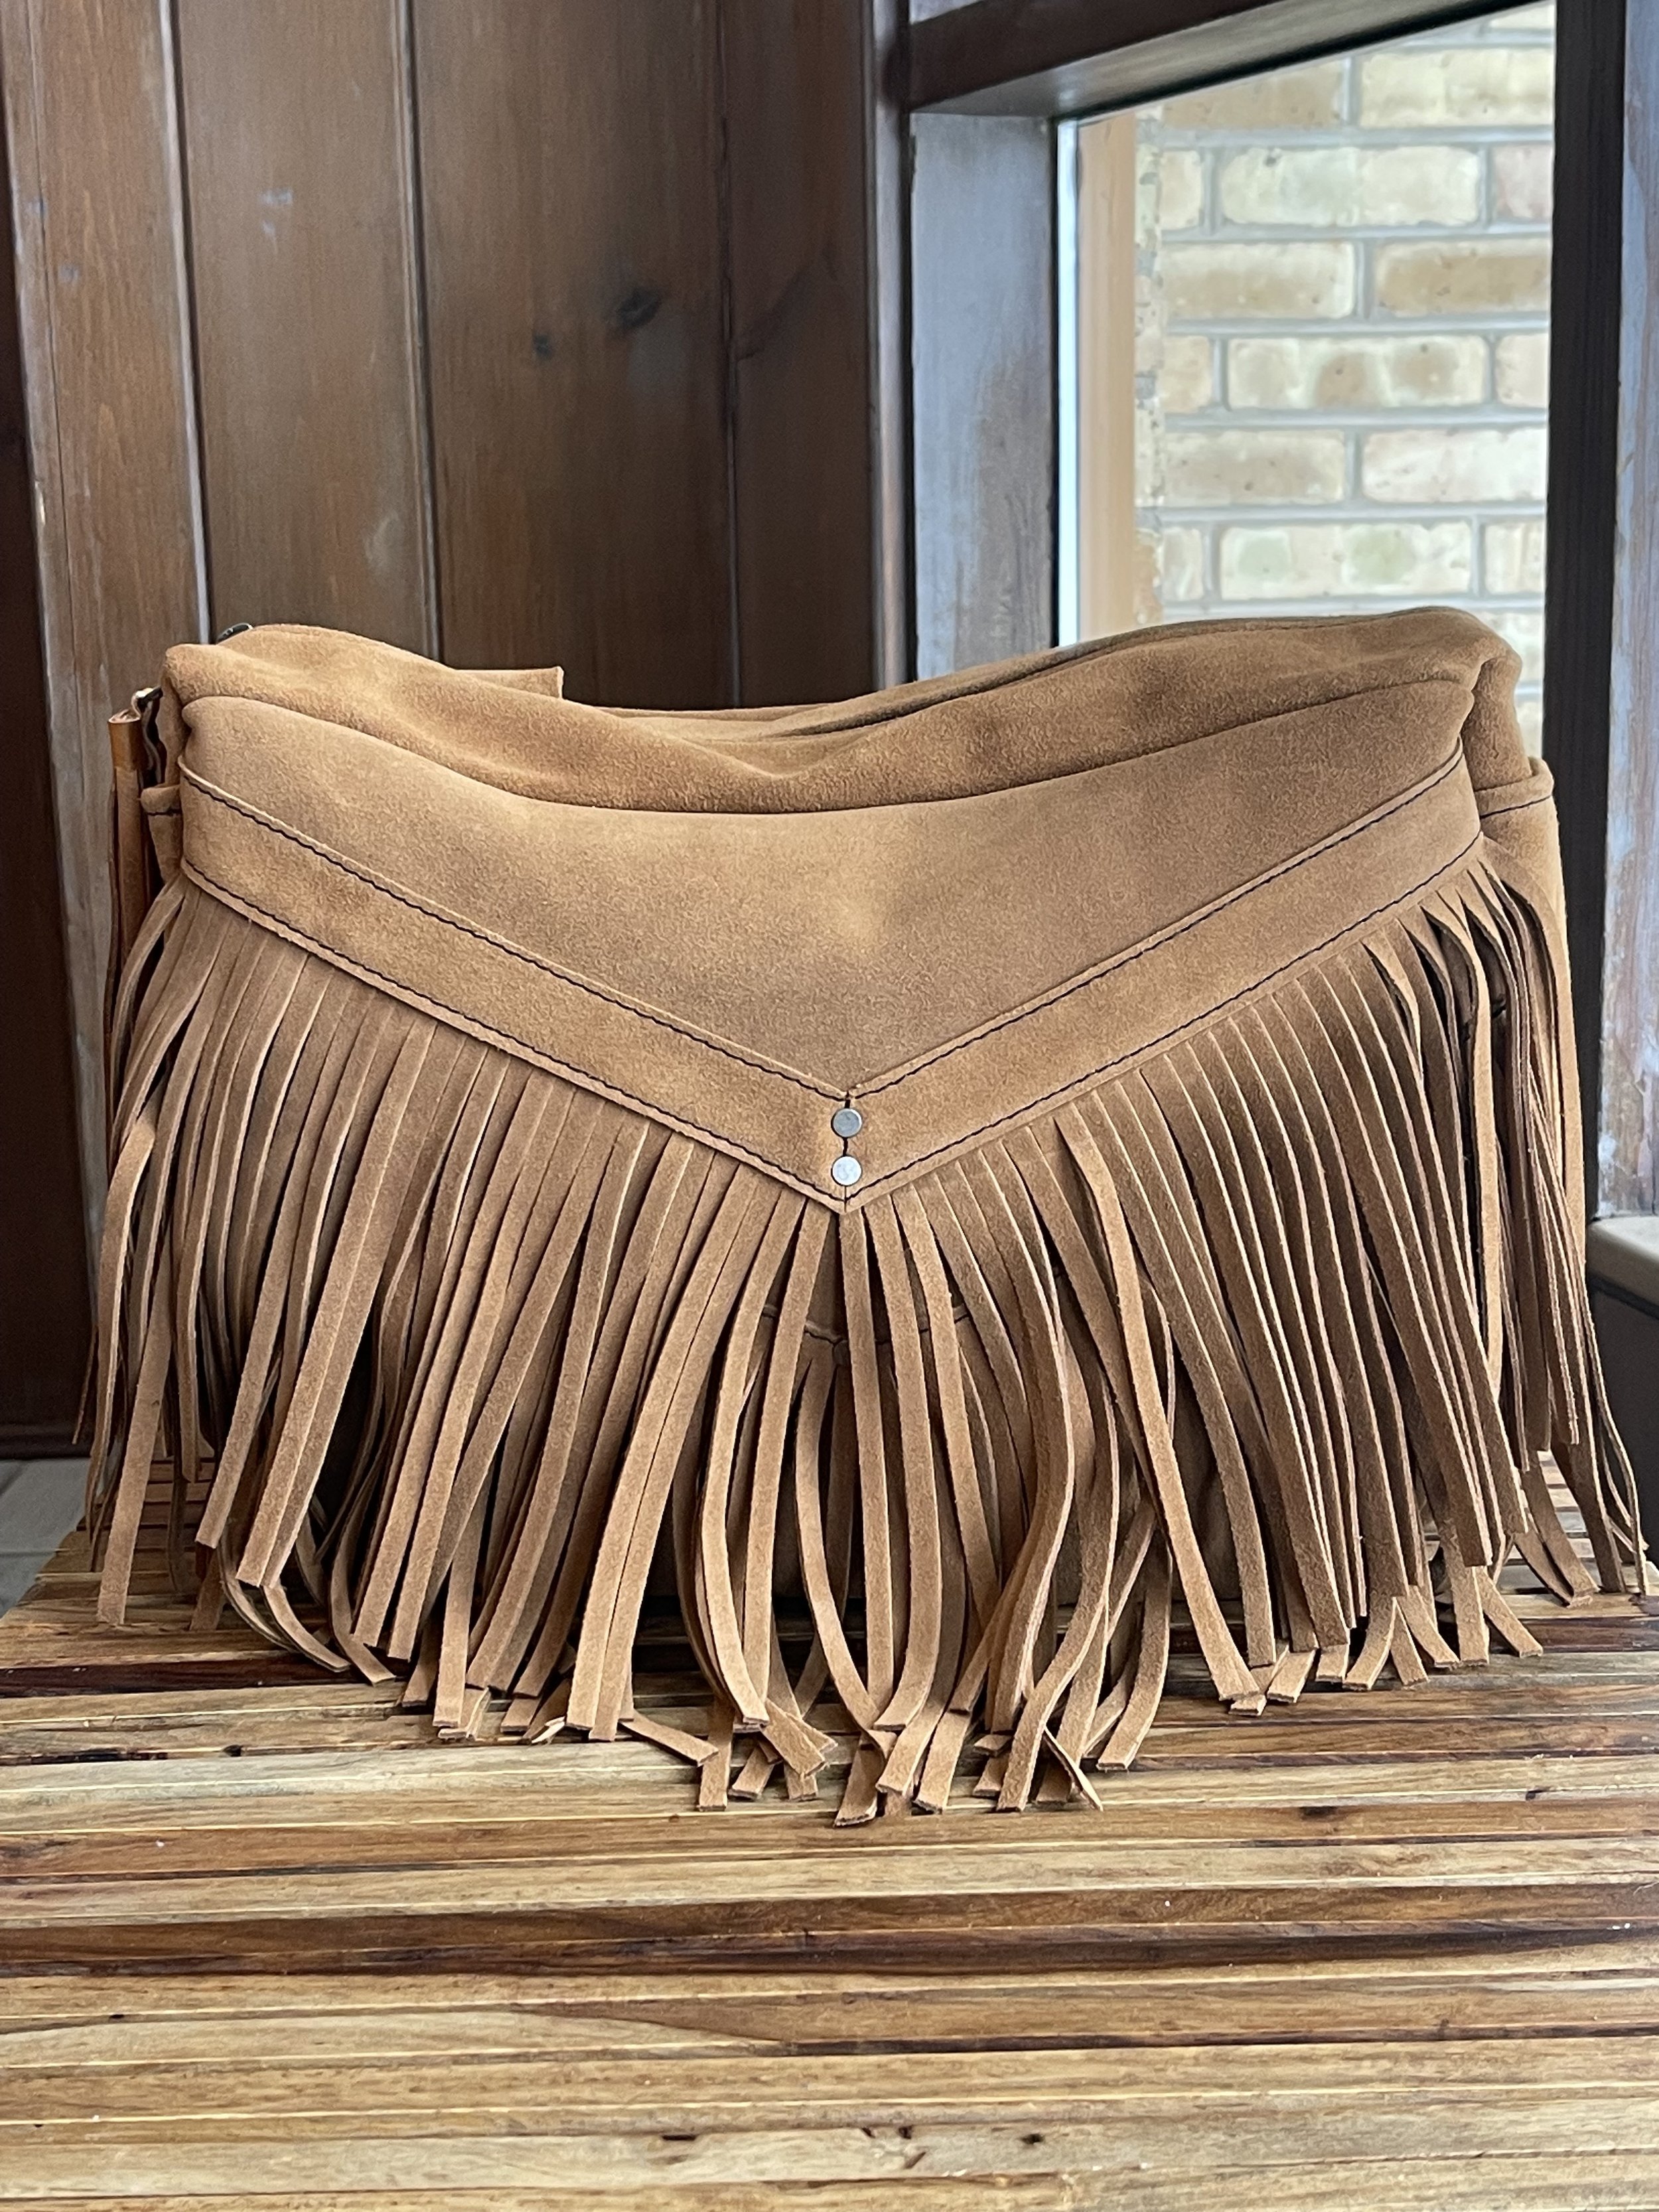 MELISSA CONVERTIBLE BAG IN TOBACCO SUEDE LEATHER